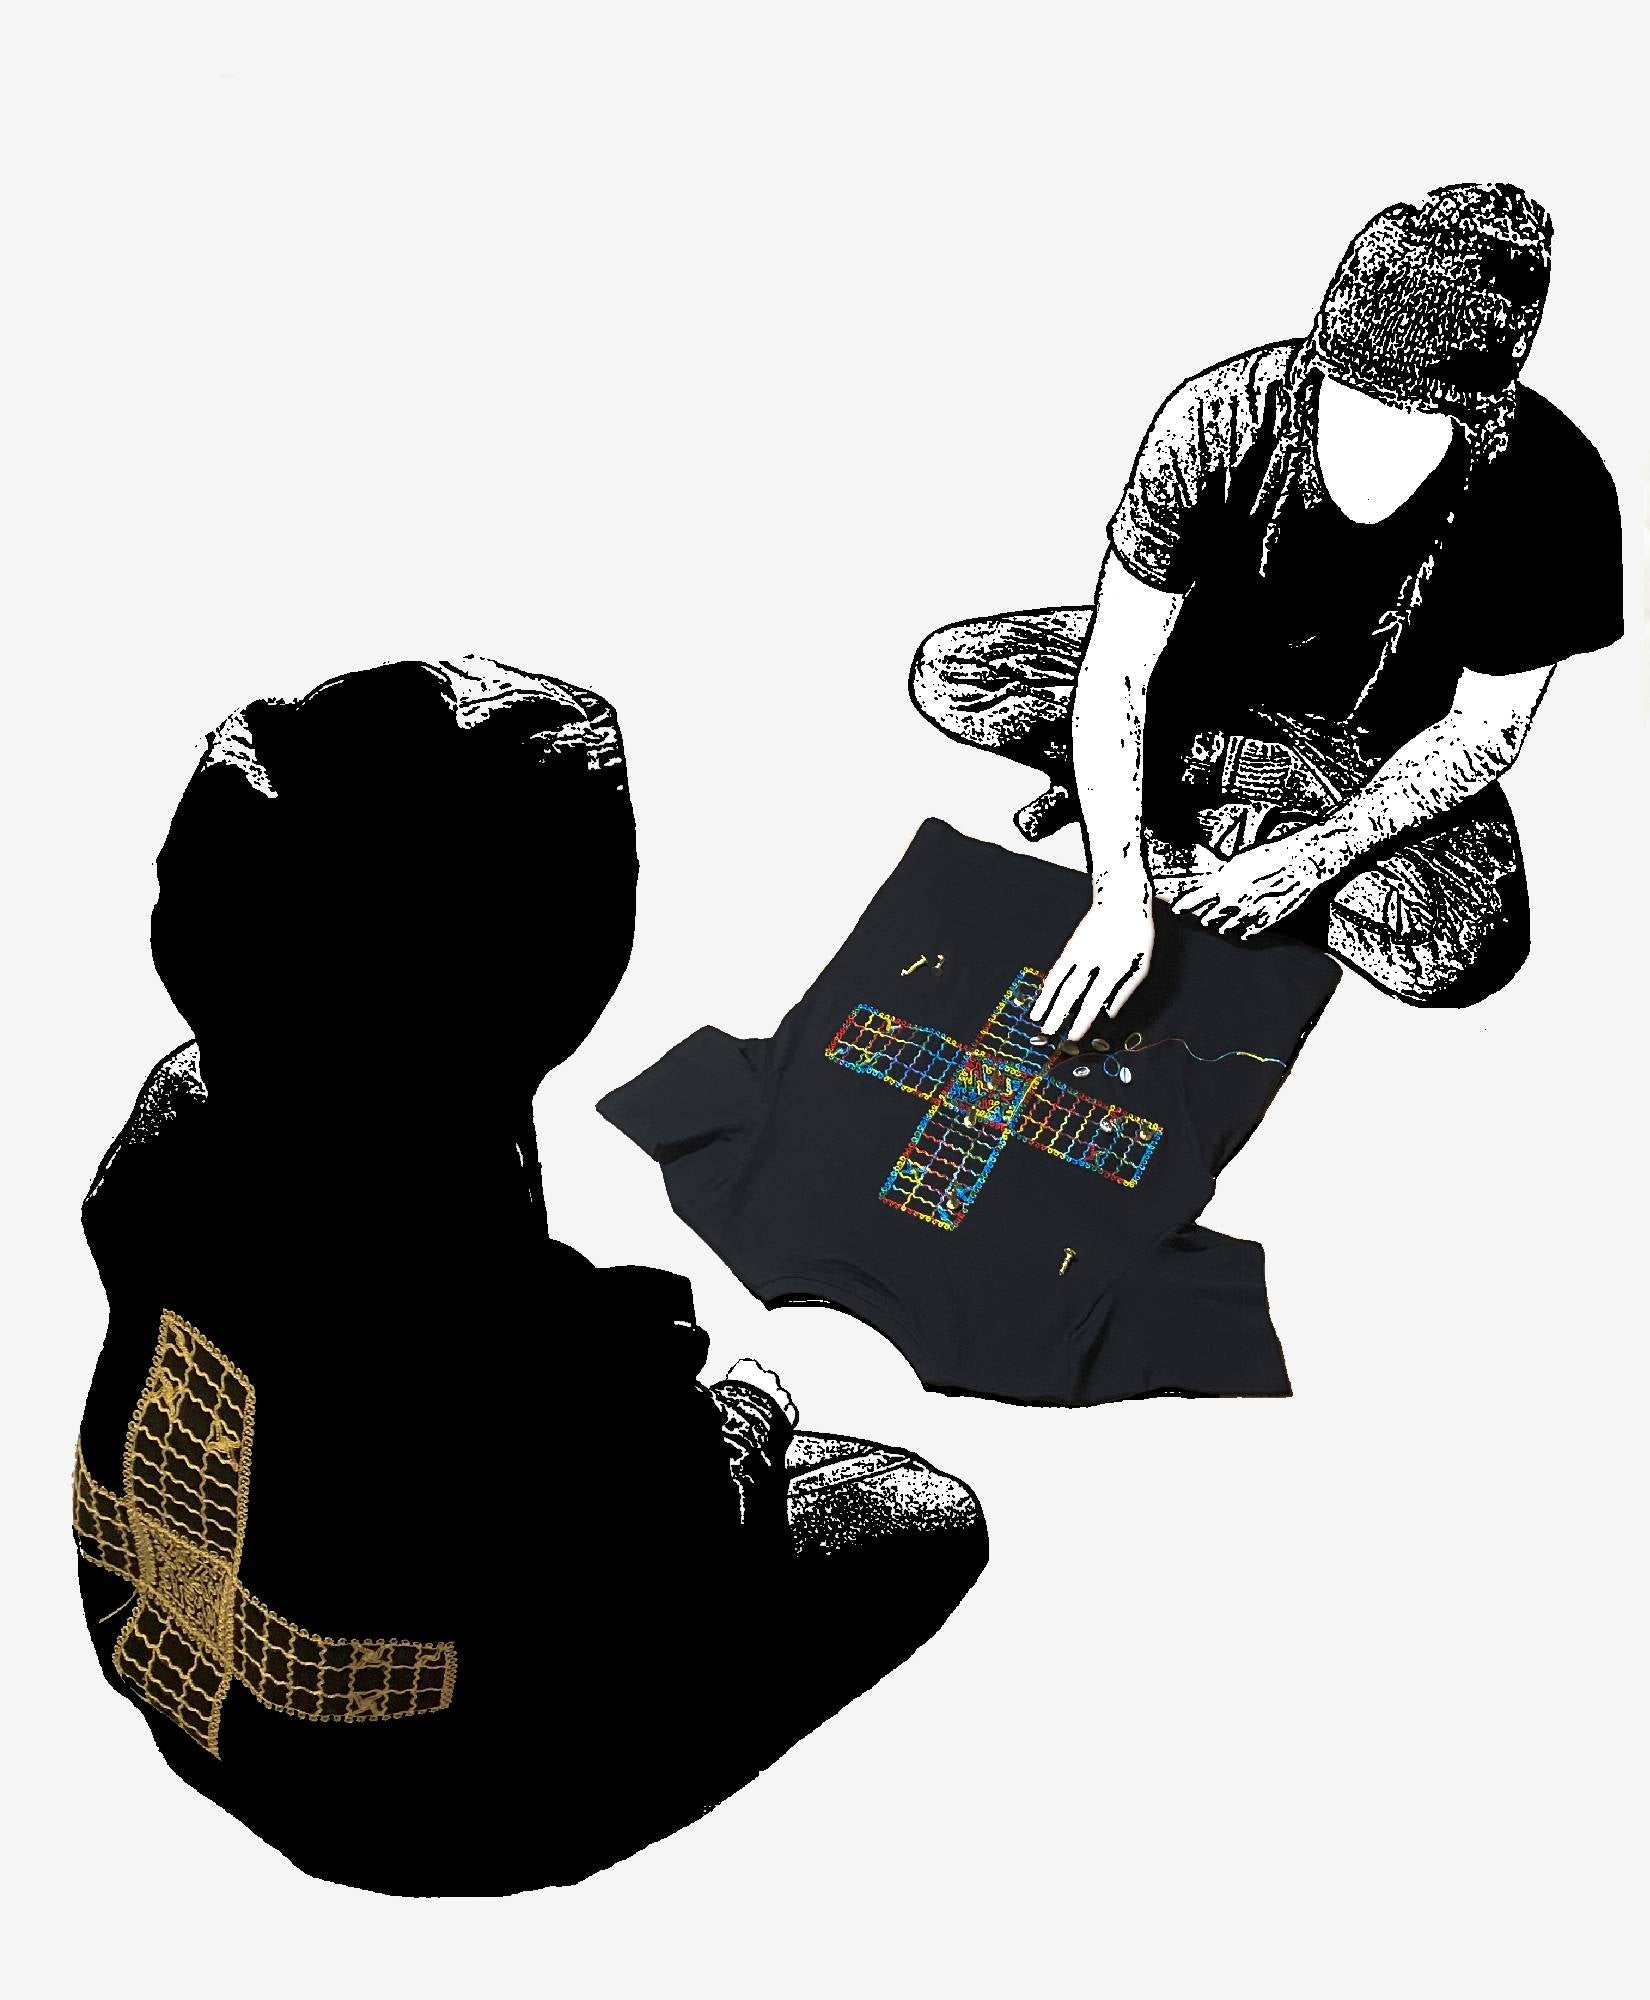 Embroidered T-shirt Black + Board Game - Barjees - (Limited Edition - 30 pcs.)